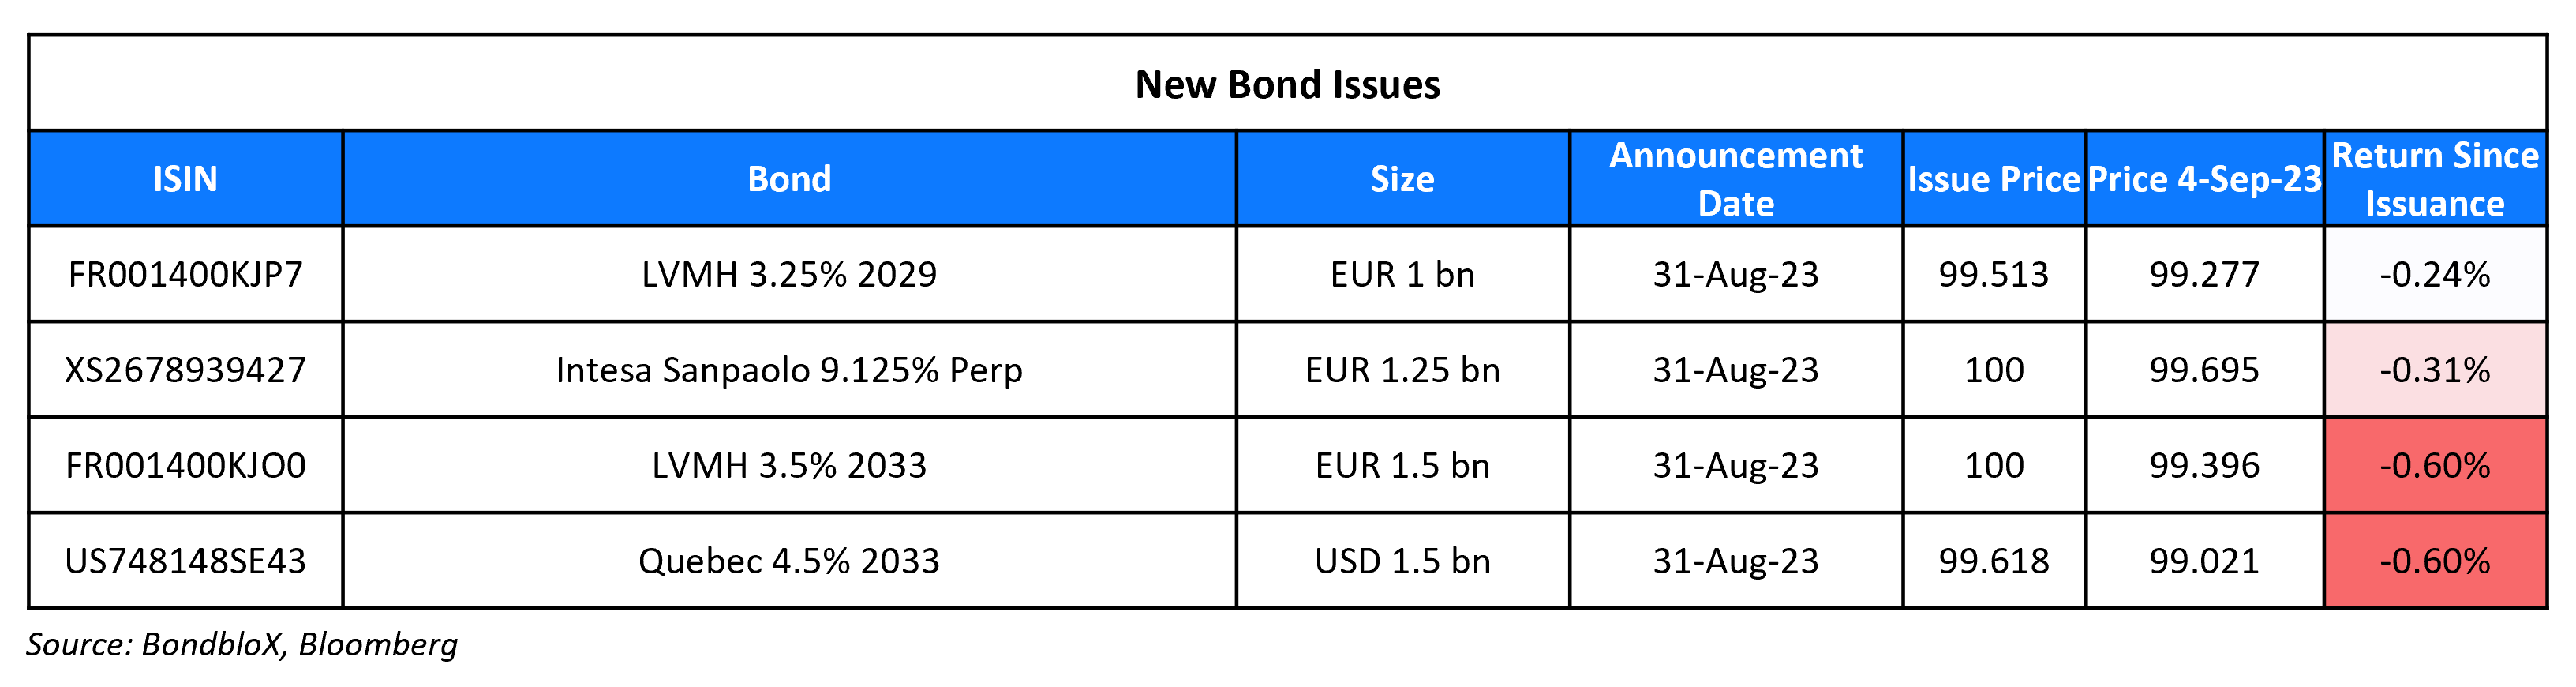 New Bond Issues 4 Sep 23